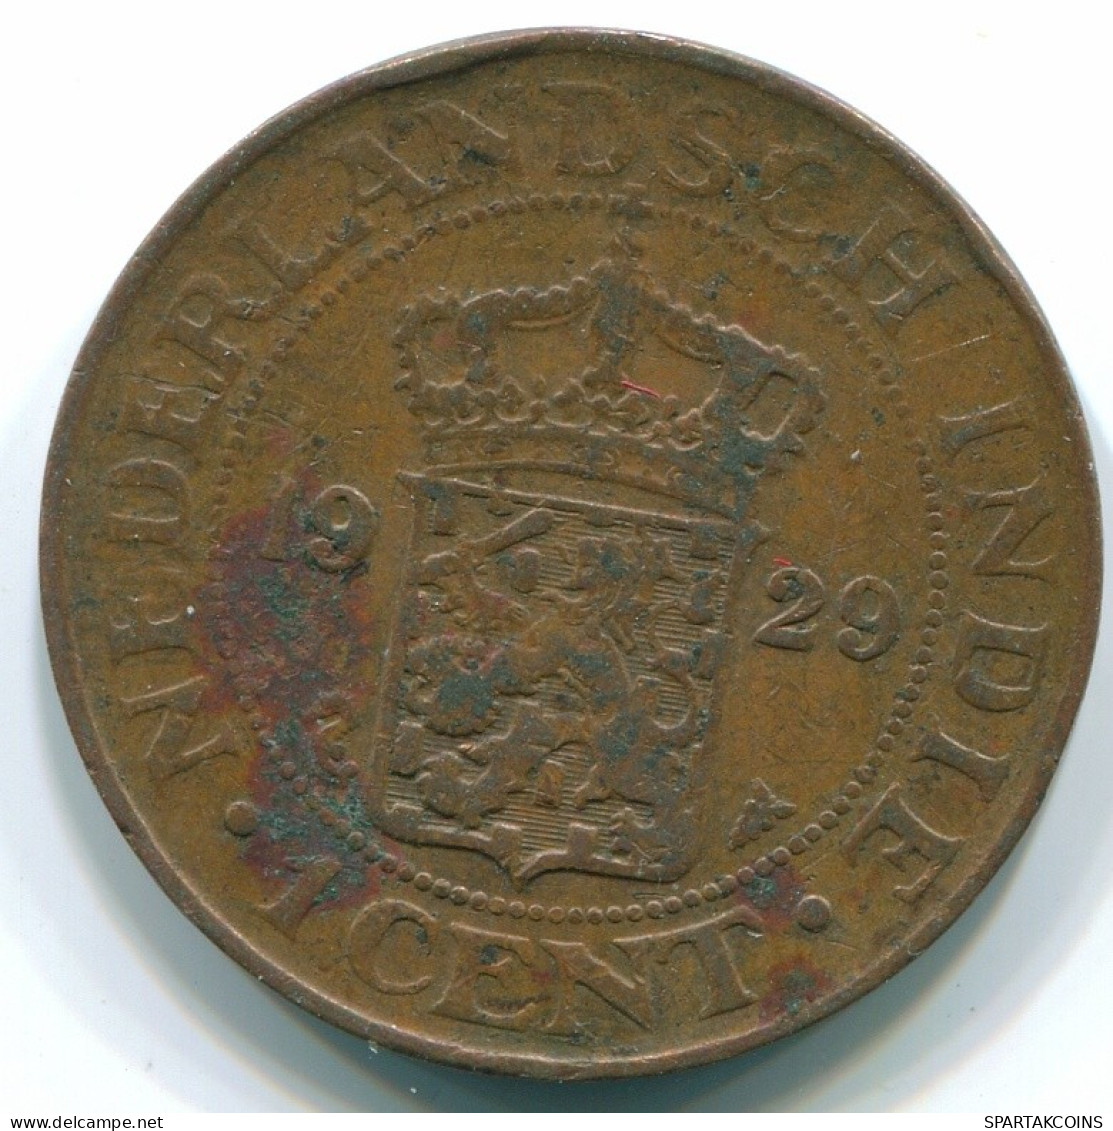 1 CENT 1929 NETHERLANDS EAST INDIES INDONESIA Copper Colonial Coin #S10103.U.A - Dutch East Indies